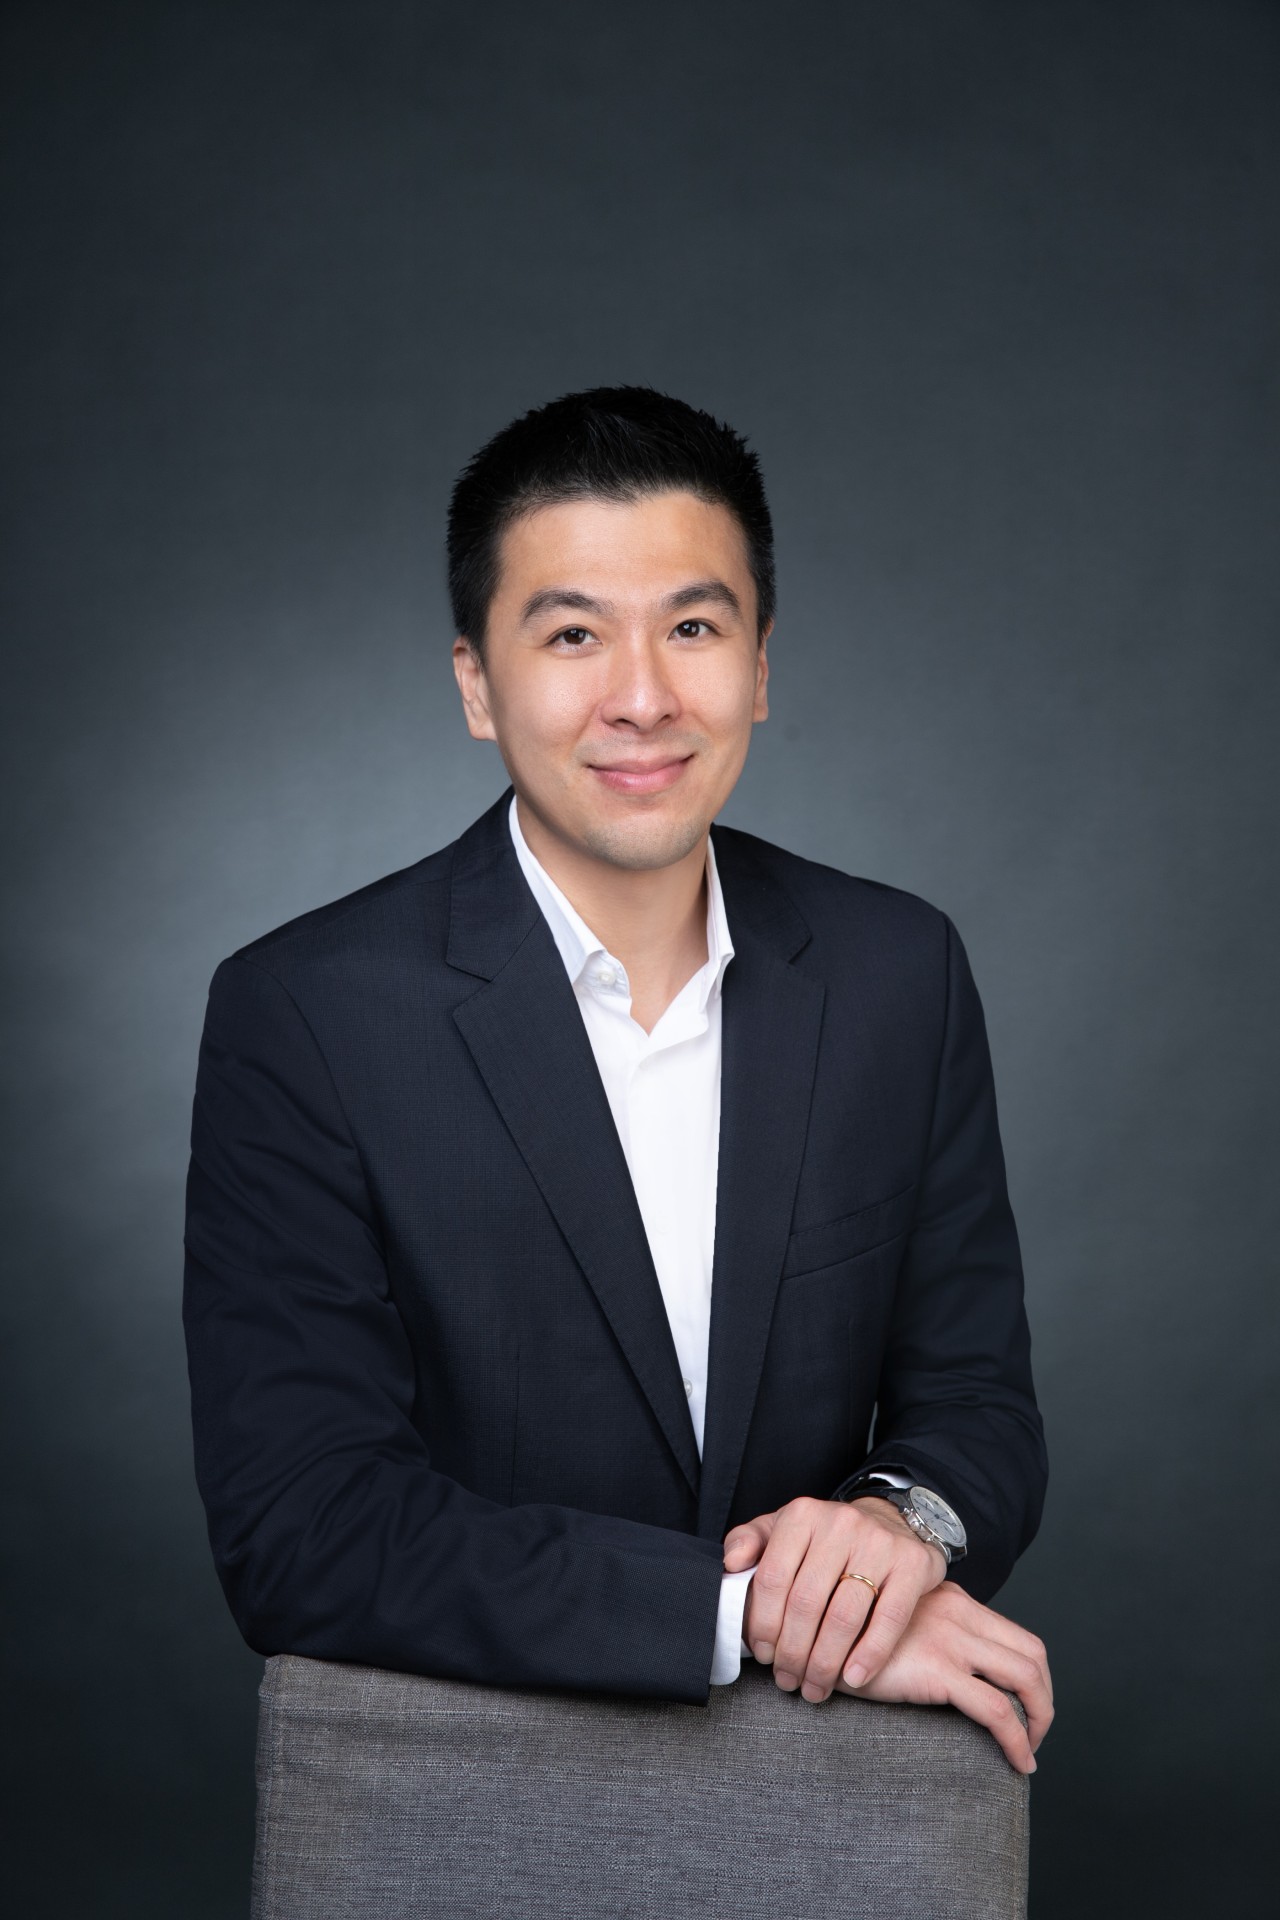 JS Gan is Co-founder and Managing Director at Building Solutions Ltd